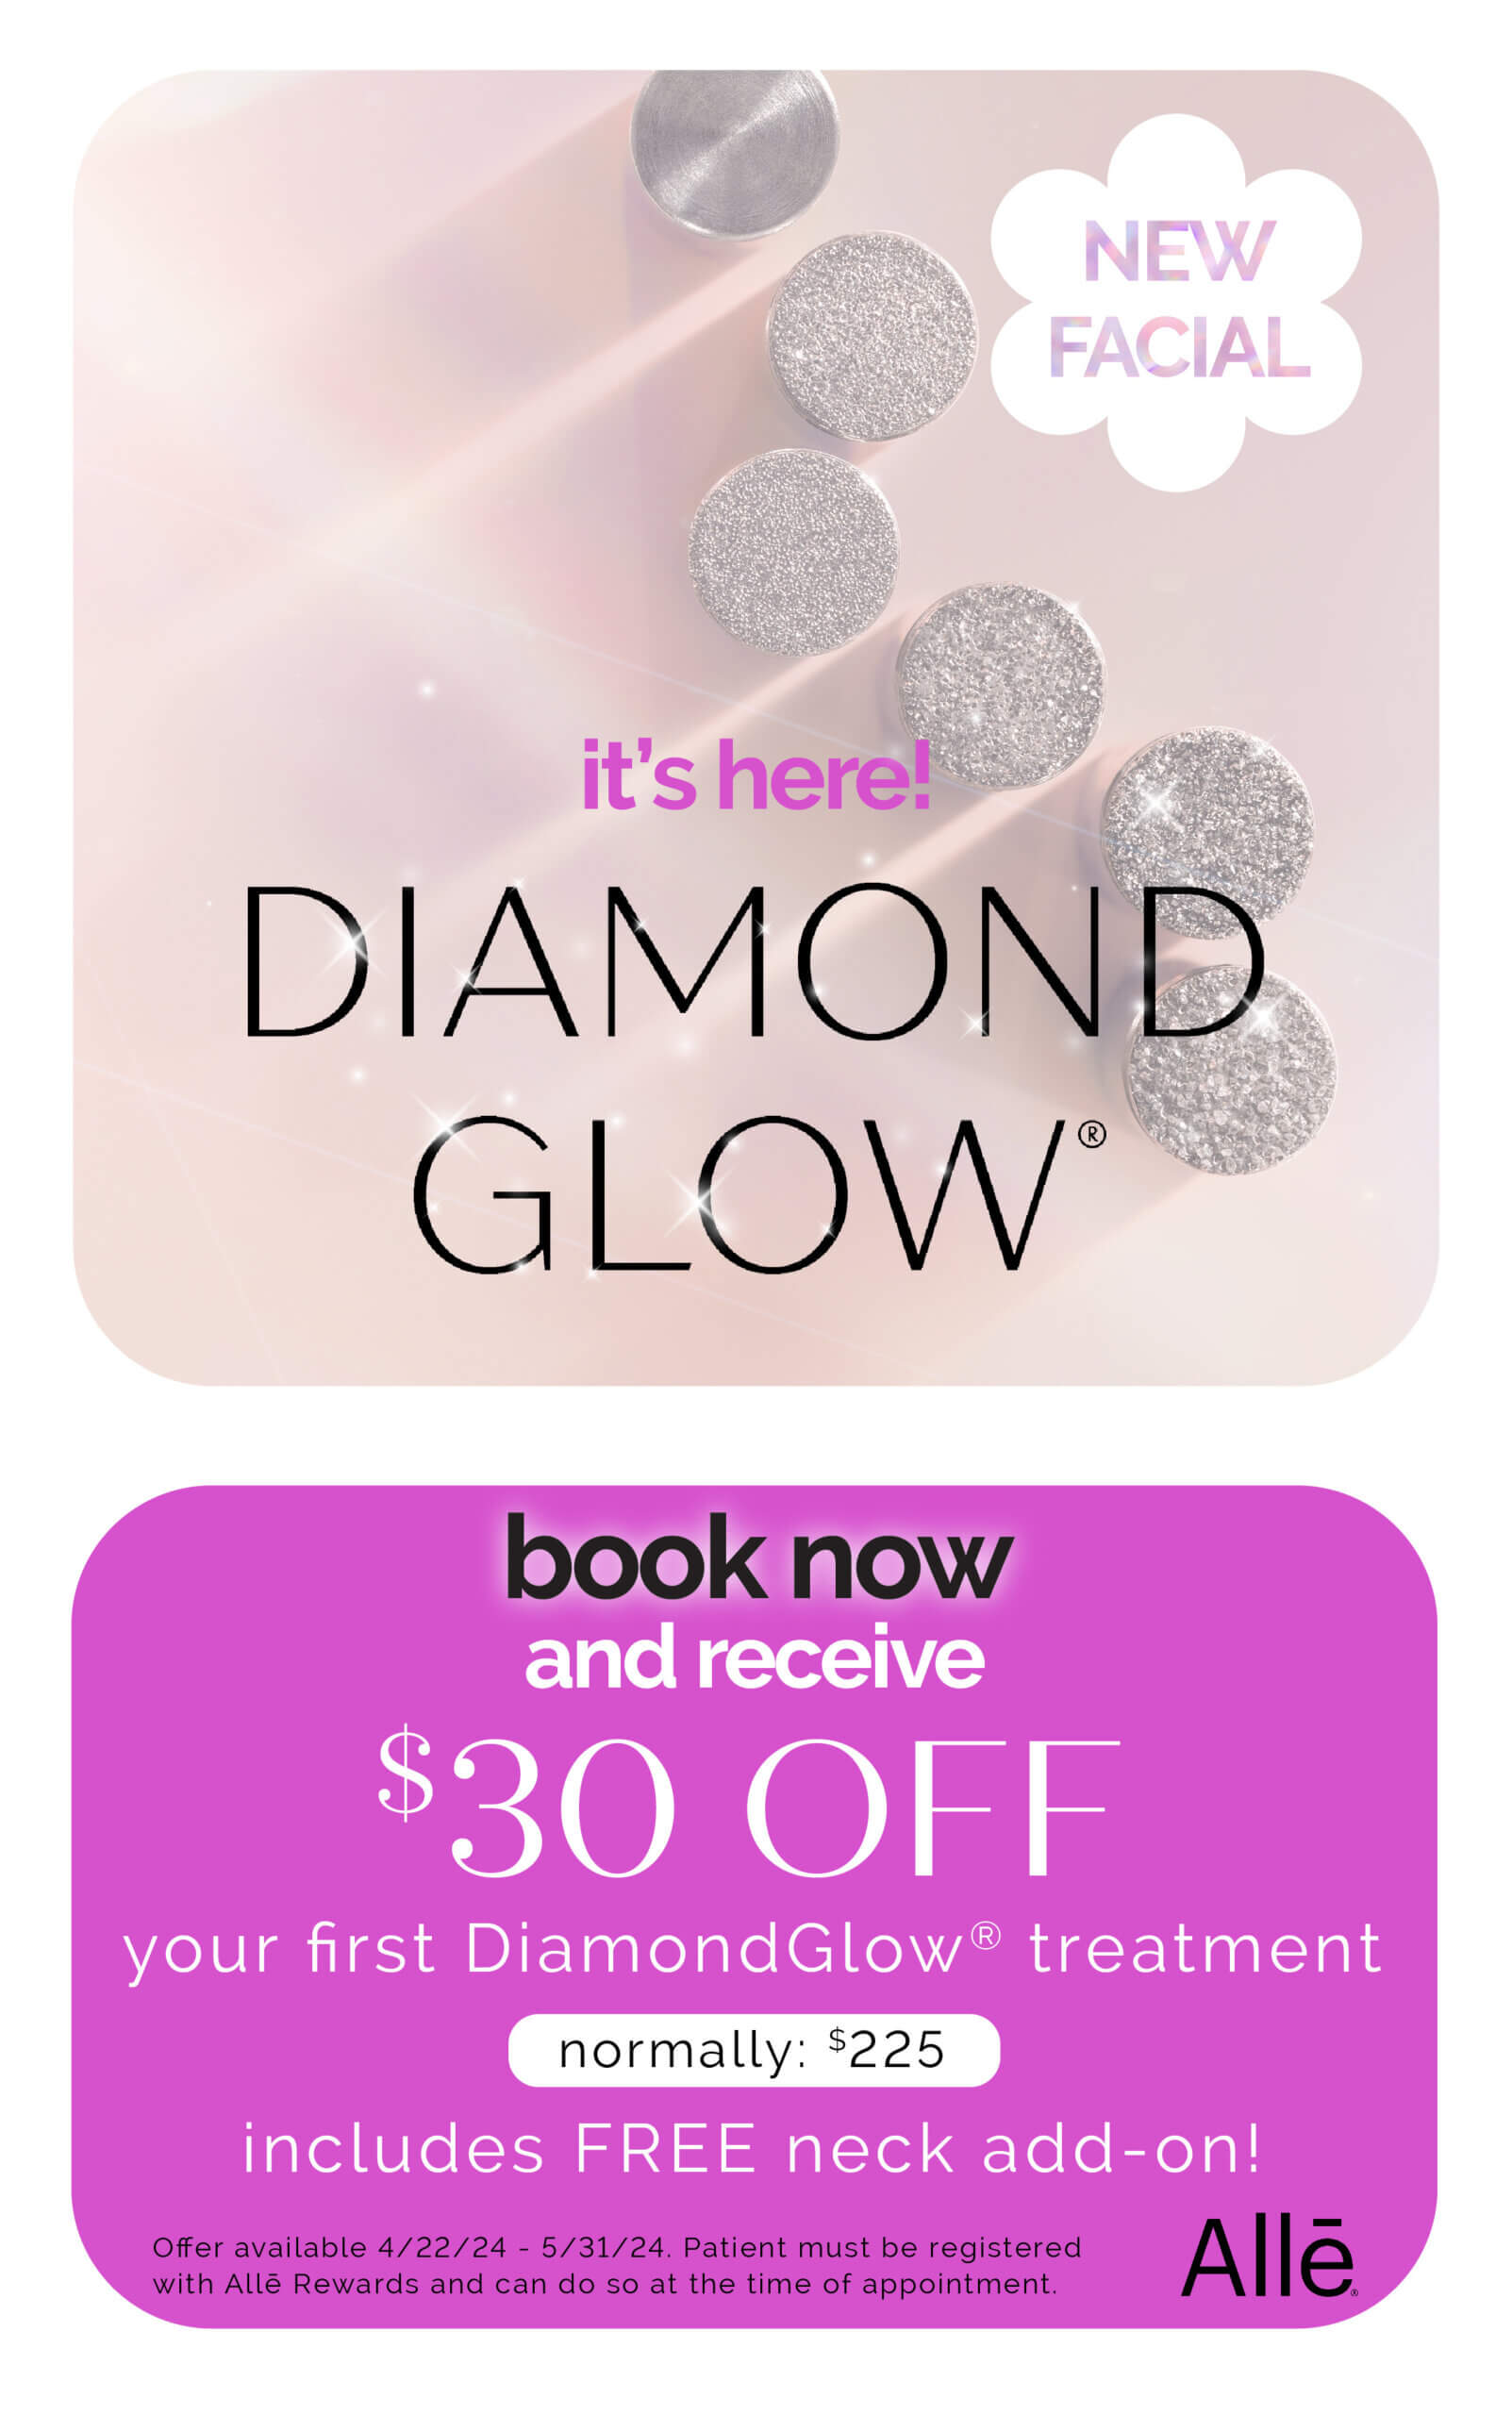 Book DiamondGlow now and receive $30 off of your first treatment until May 31st!